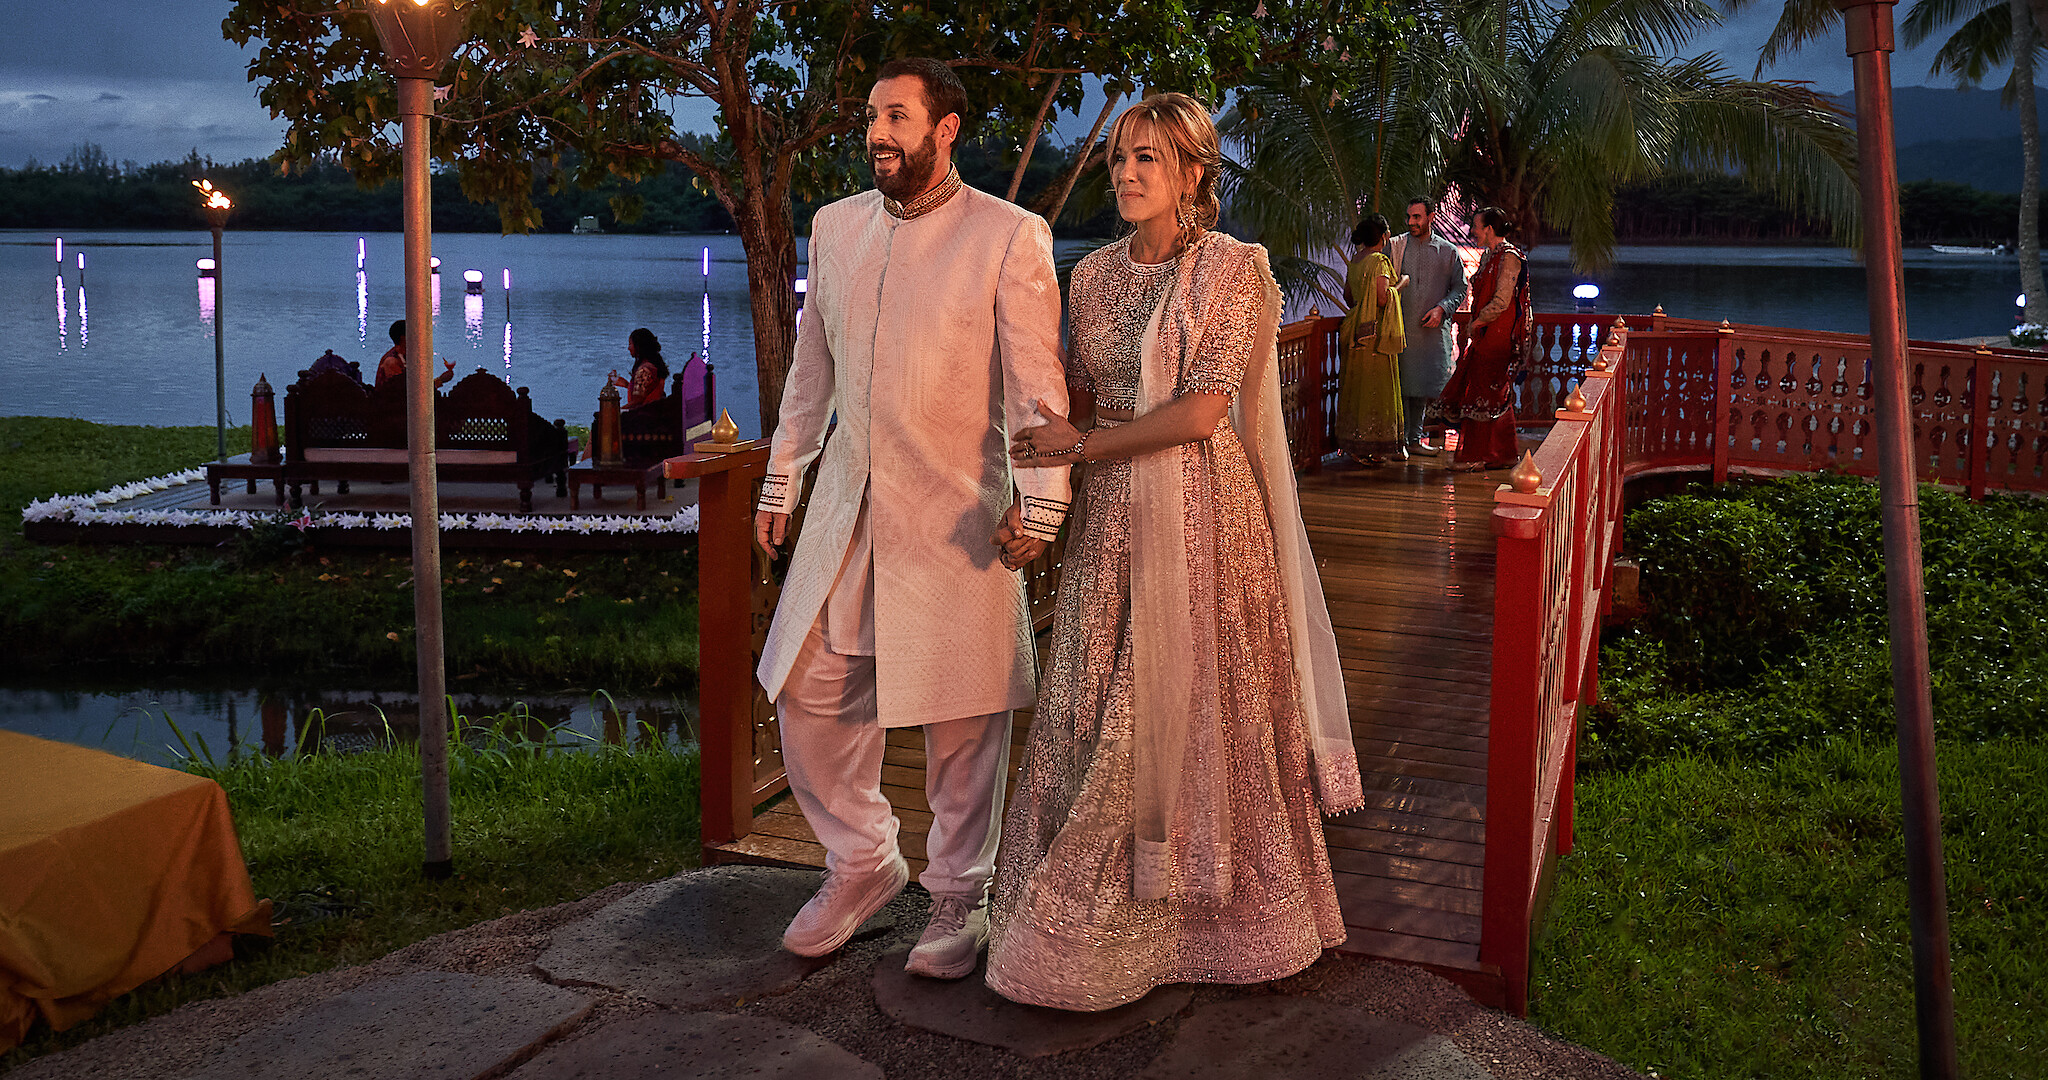 Adam Sandler and Jennifer Aniston Head to an Indian Wedding in